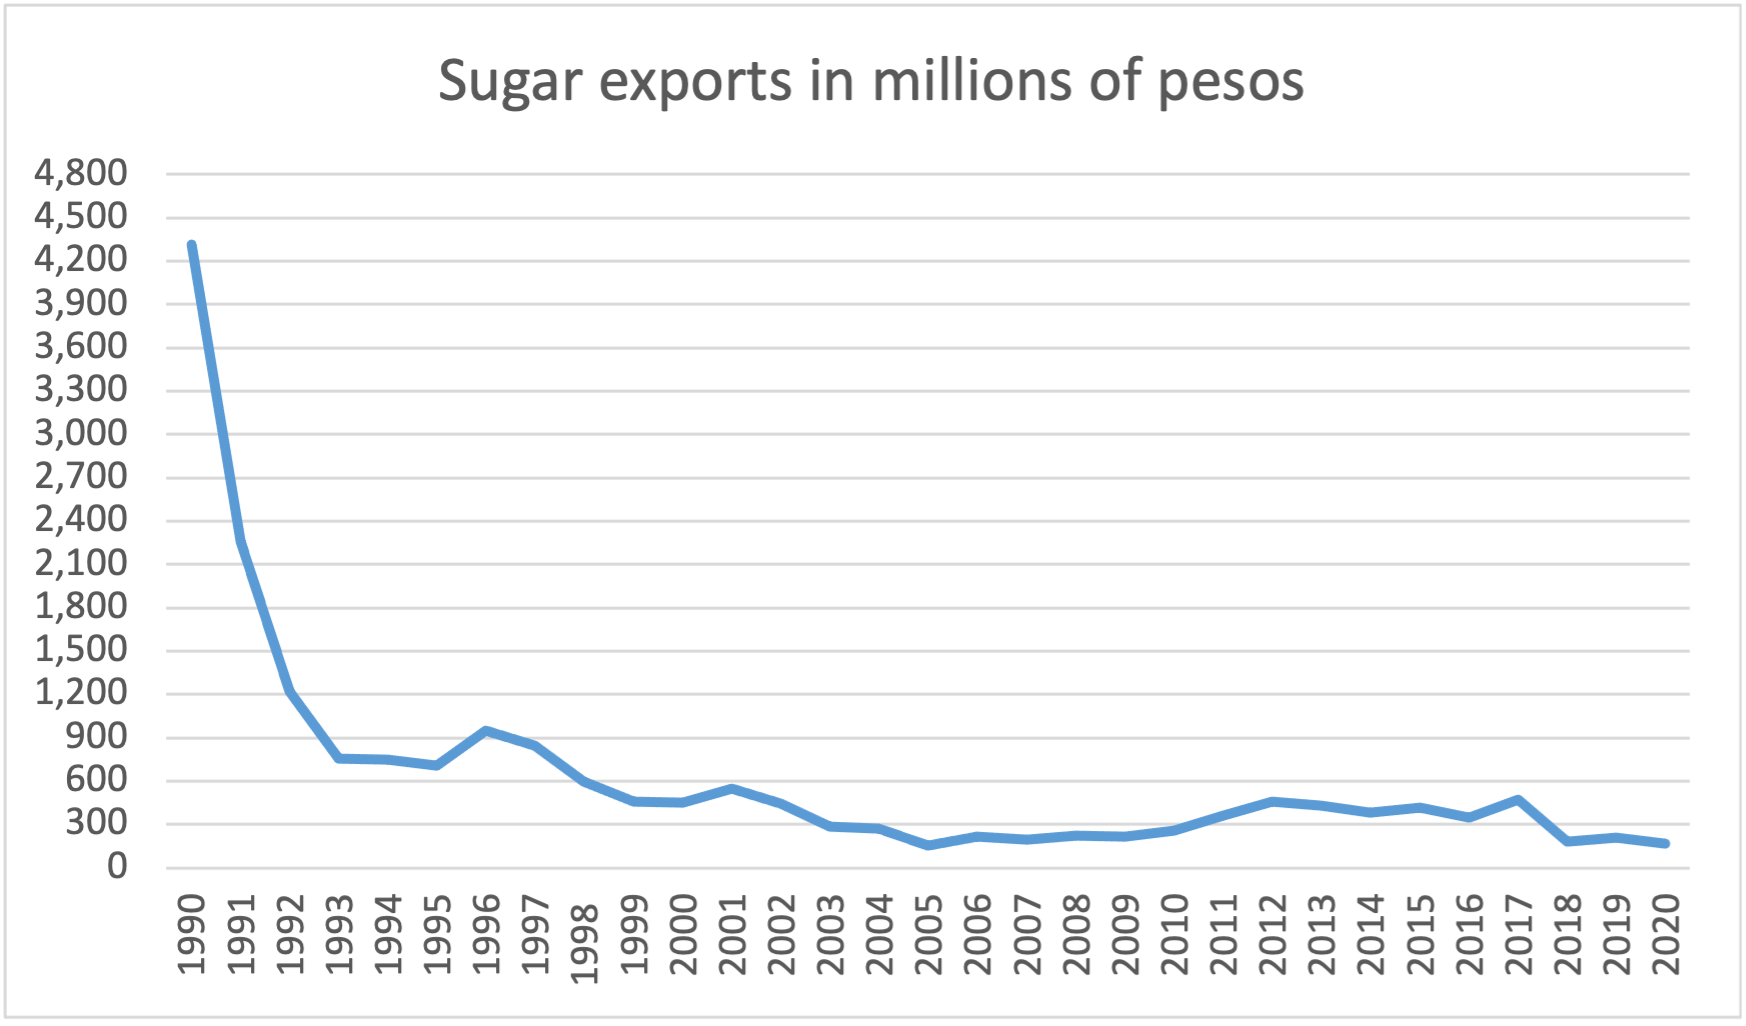 The graph shows the drop in sugar exports by millions of Cuban pesos from close to 4,500 in 1990 to close to 0 in 2020